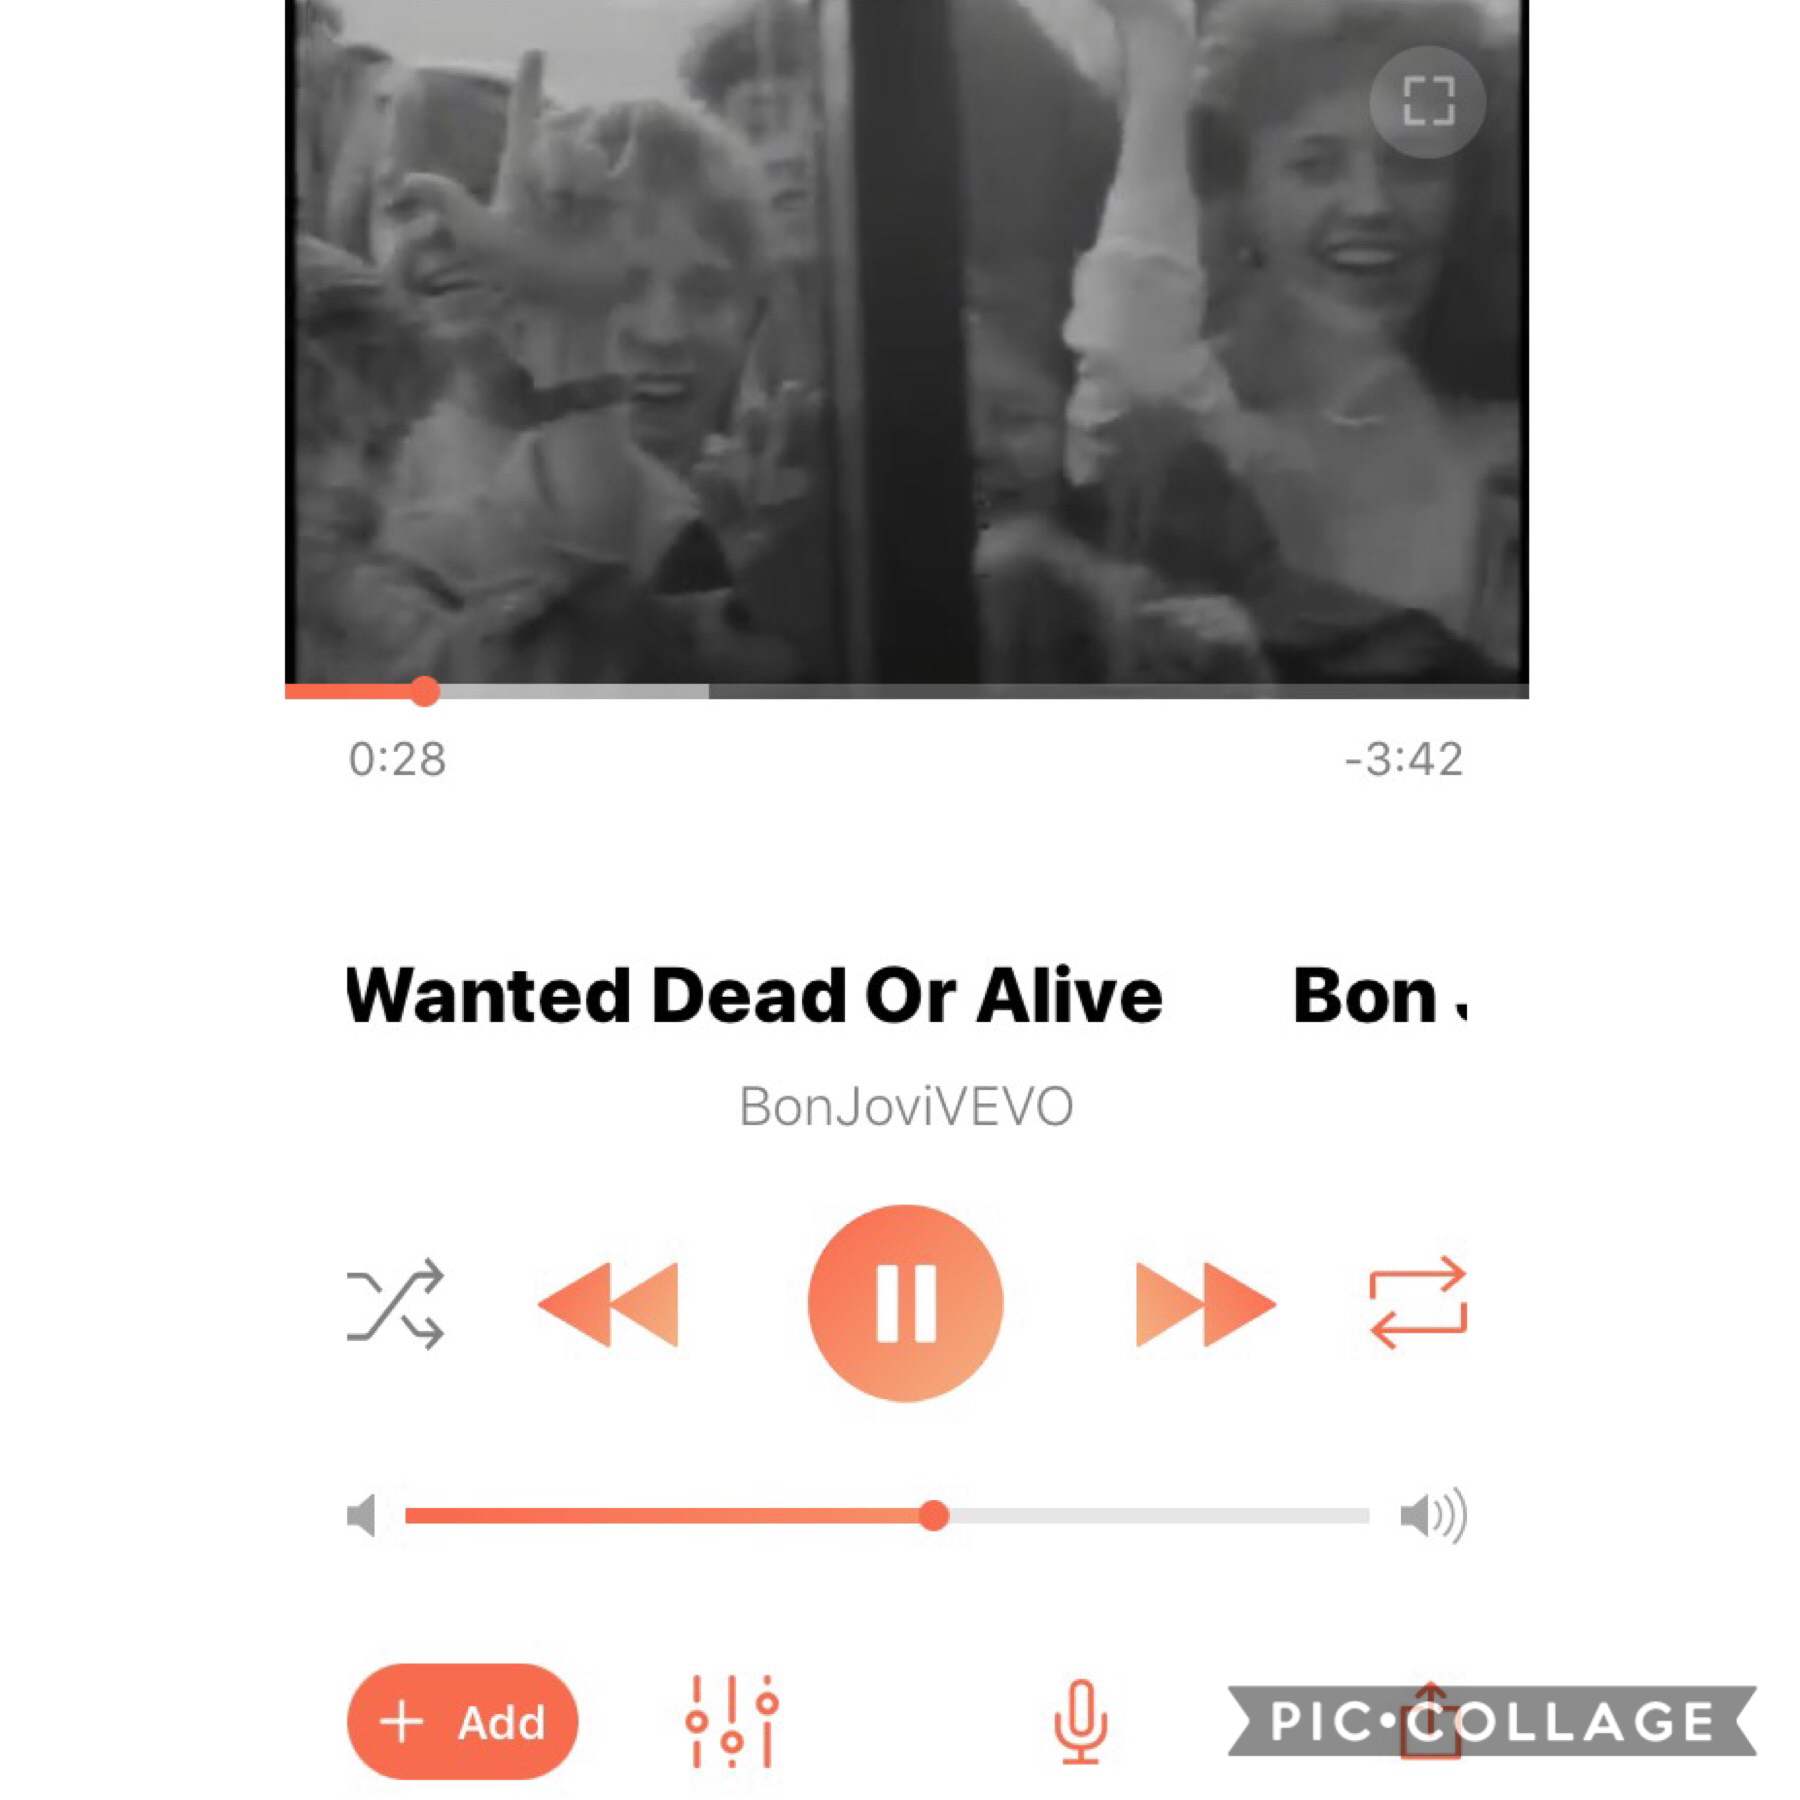 Wanted Dead Or Alive by Bon Jovi is literally my favorite song rn Emma and I made it “our song” ITS SO GOOD